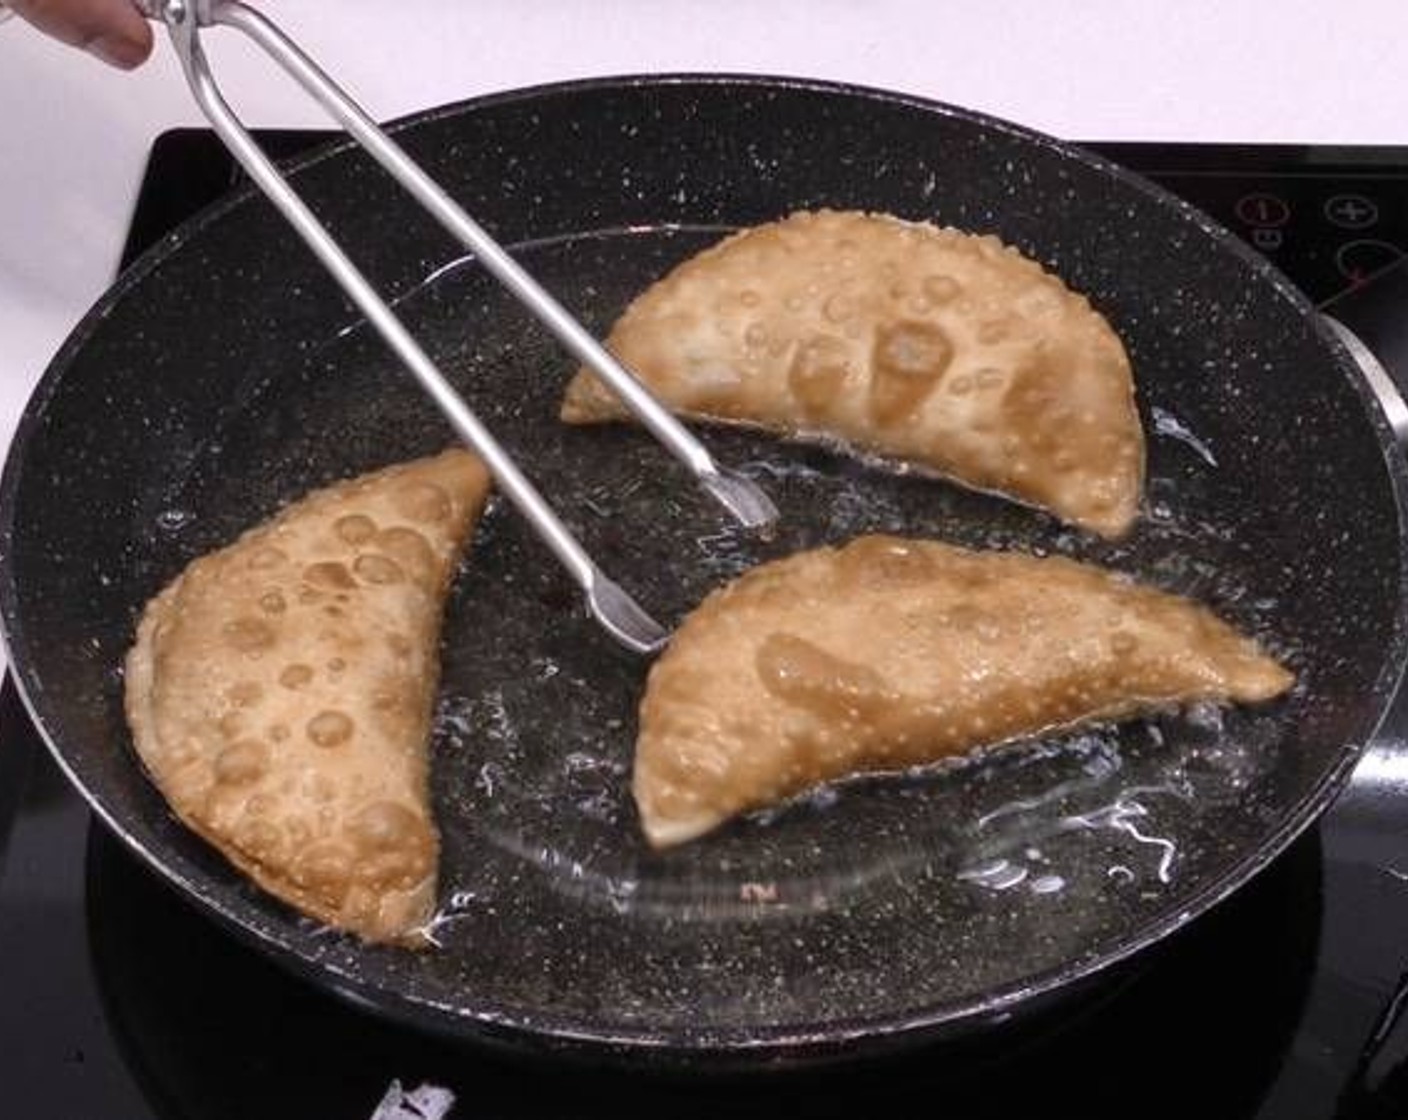 step 5 In a pan add about an inch of Sunflower Oil (as needed) over medium heat. Once it's very hot, fry the empanadas until golden brown and crunchy.